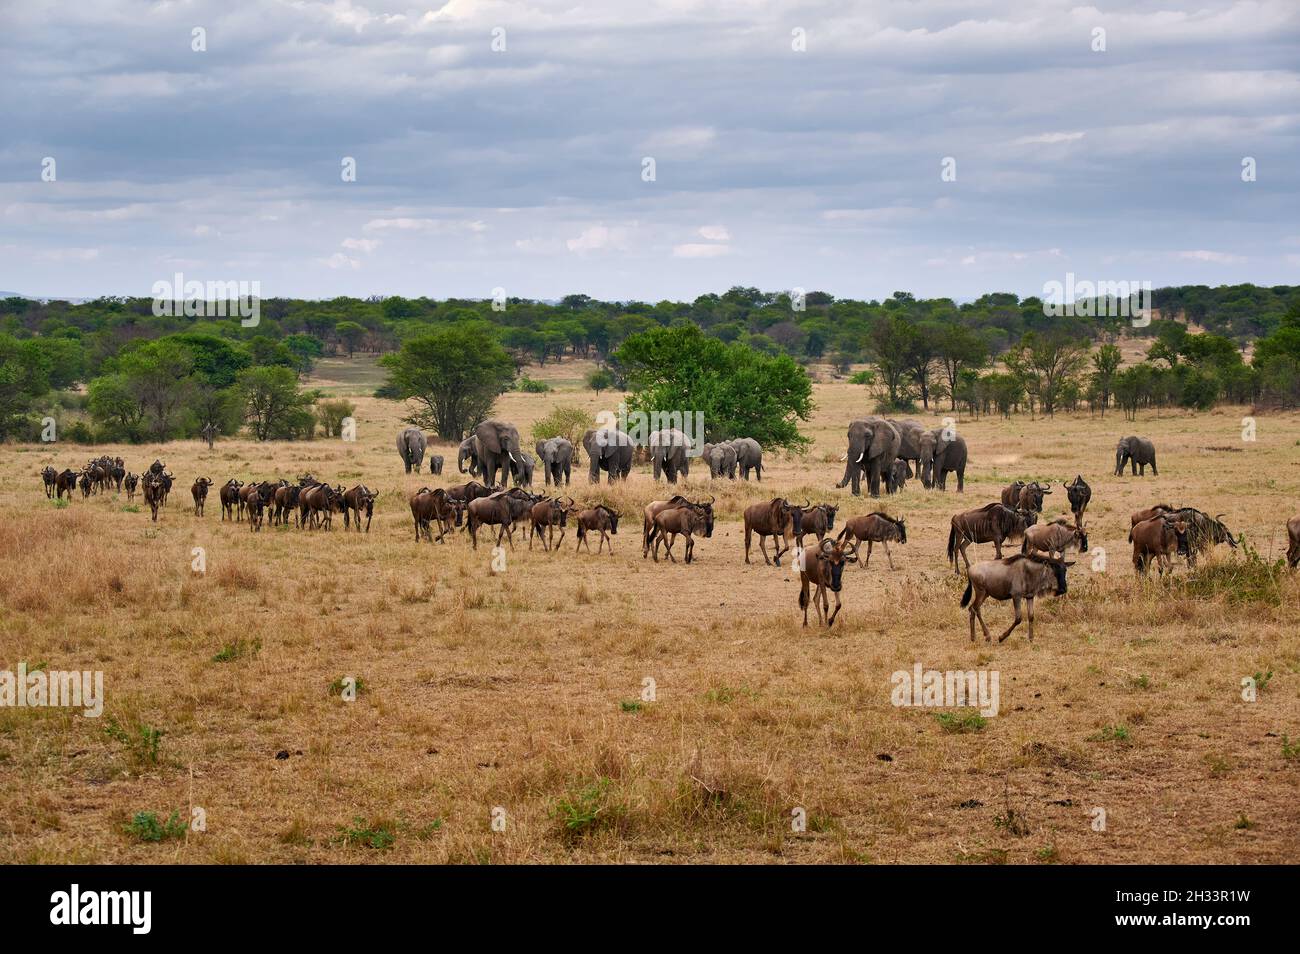 A herd of blue wildebeest (Connochaetes taurinus) on great migration passing in front of a herd of African bush elephant (Loxodonta africana) inSereng Stock Photo